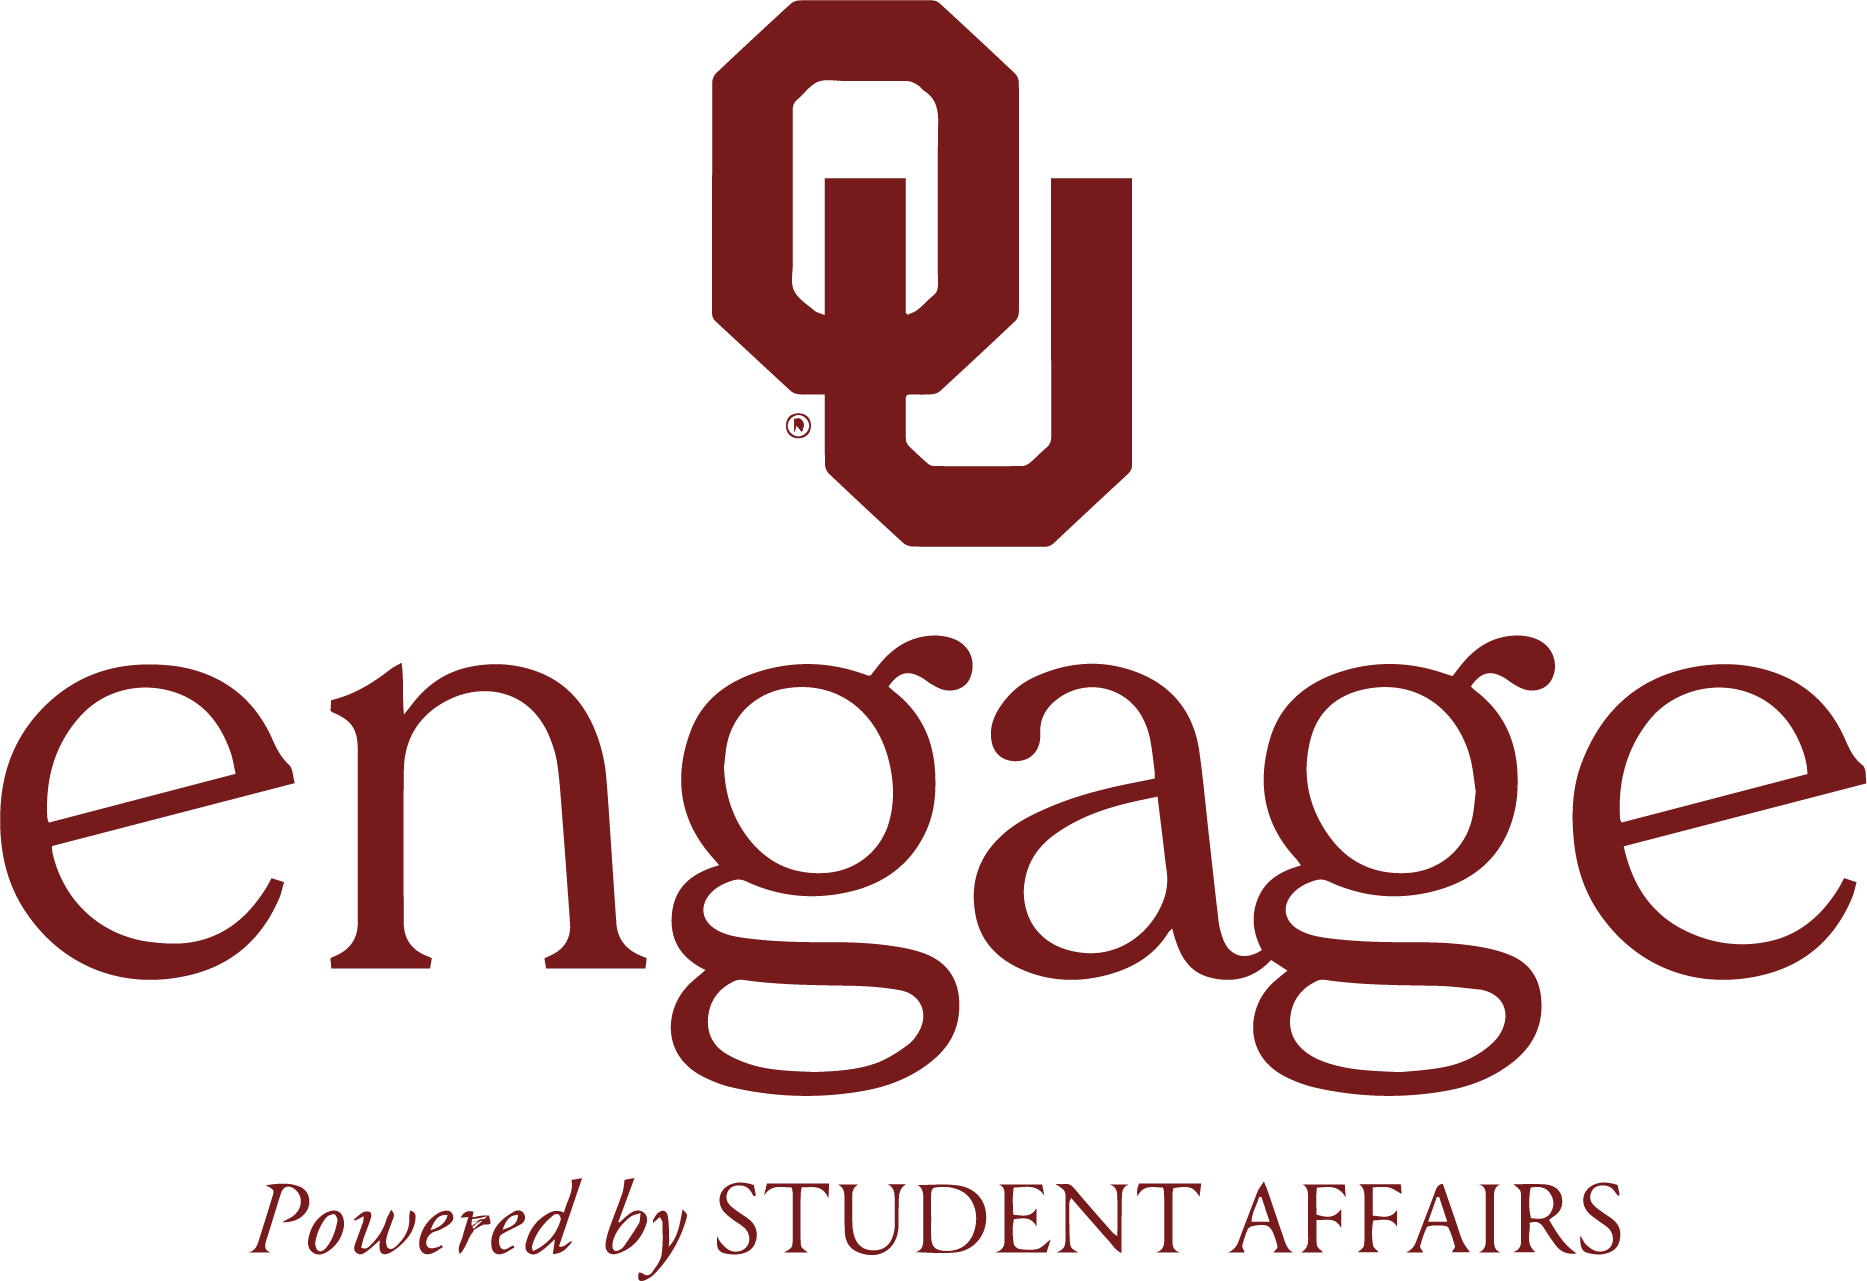 interlocking ou and engage powered by student affairs